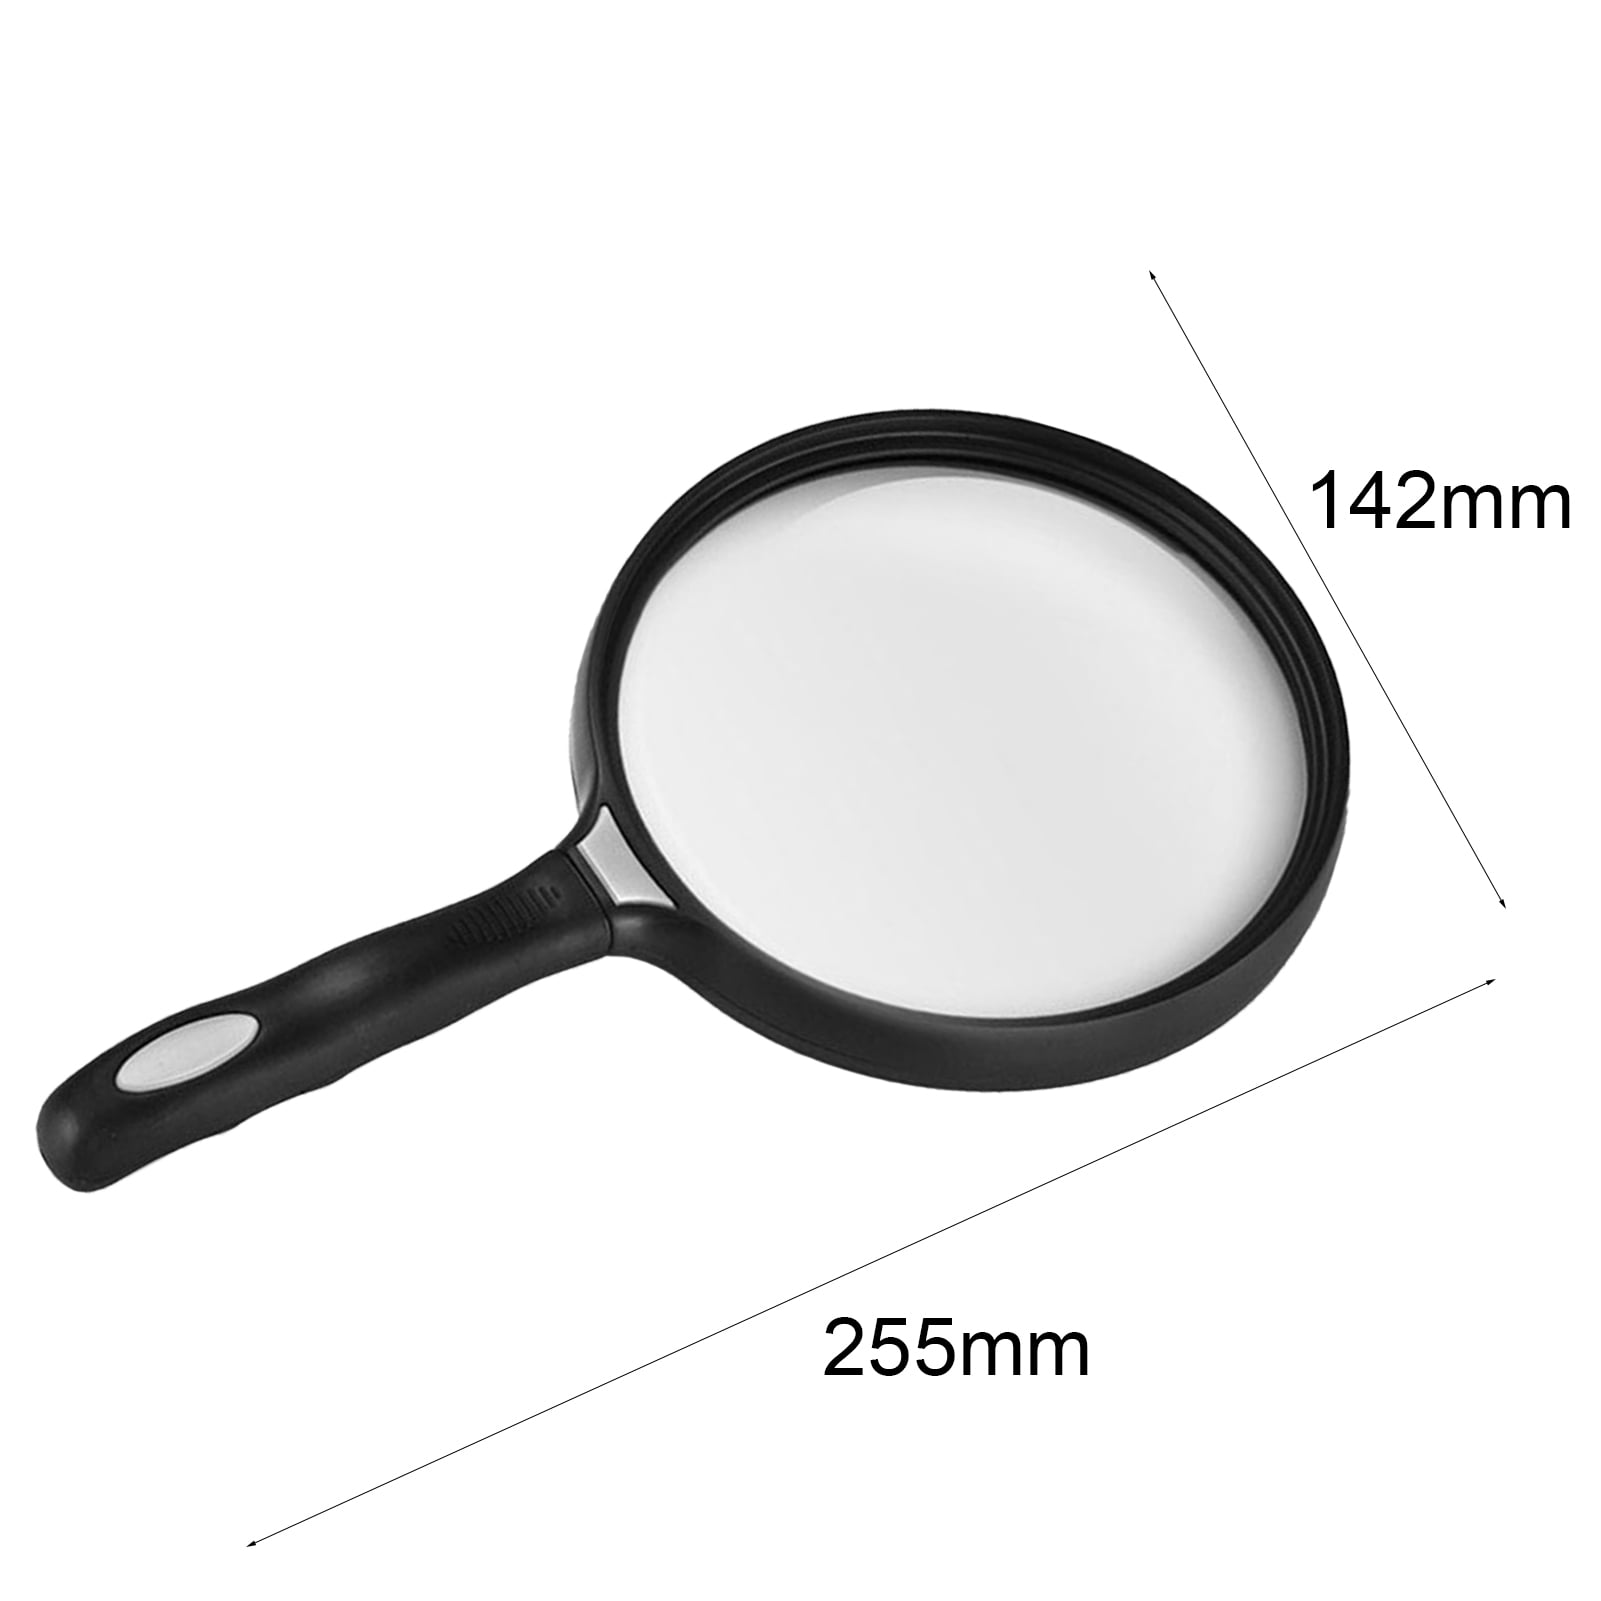 Details about   5X Loupe Magnifying Glasses Hand Lens Folding Pocket Magnifier Leather Pouch 